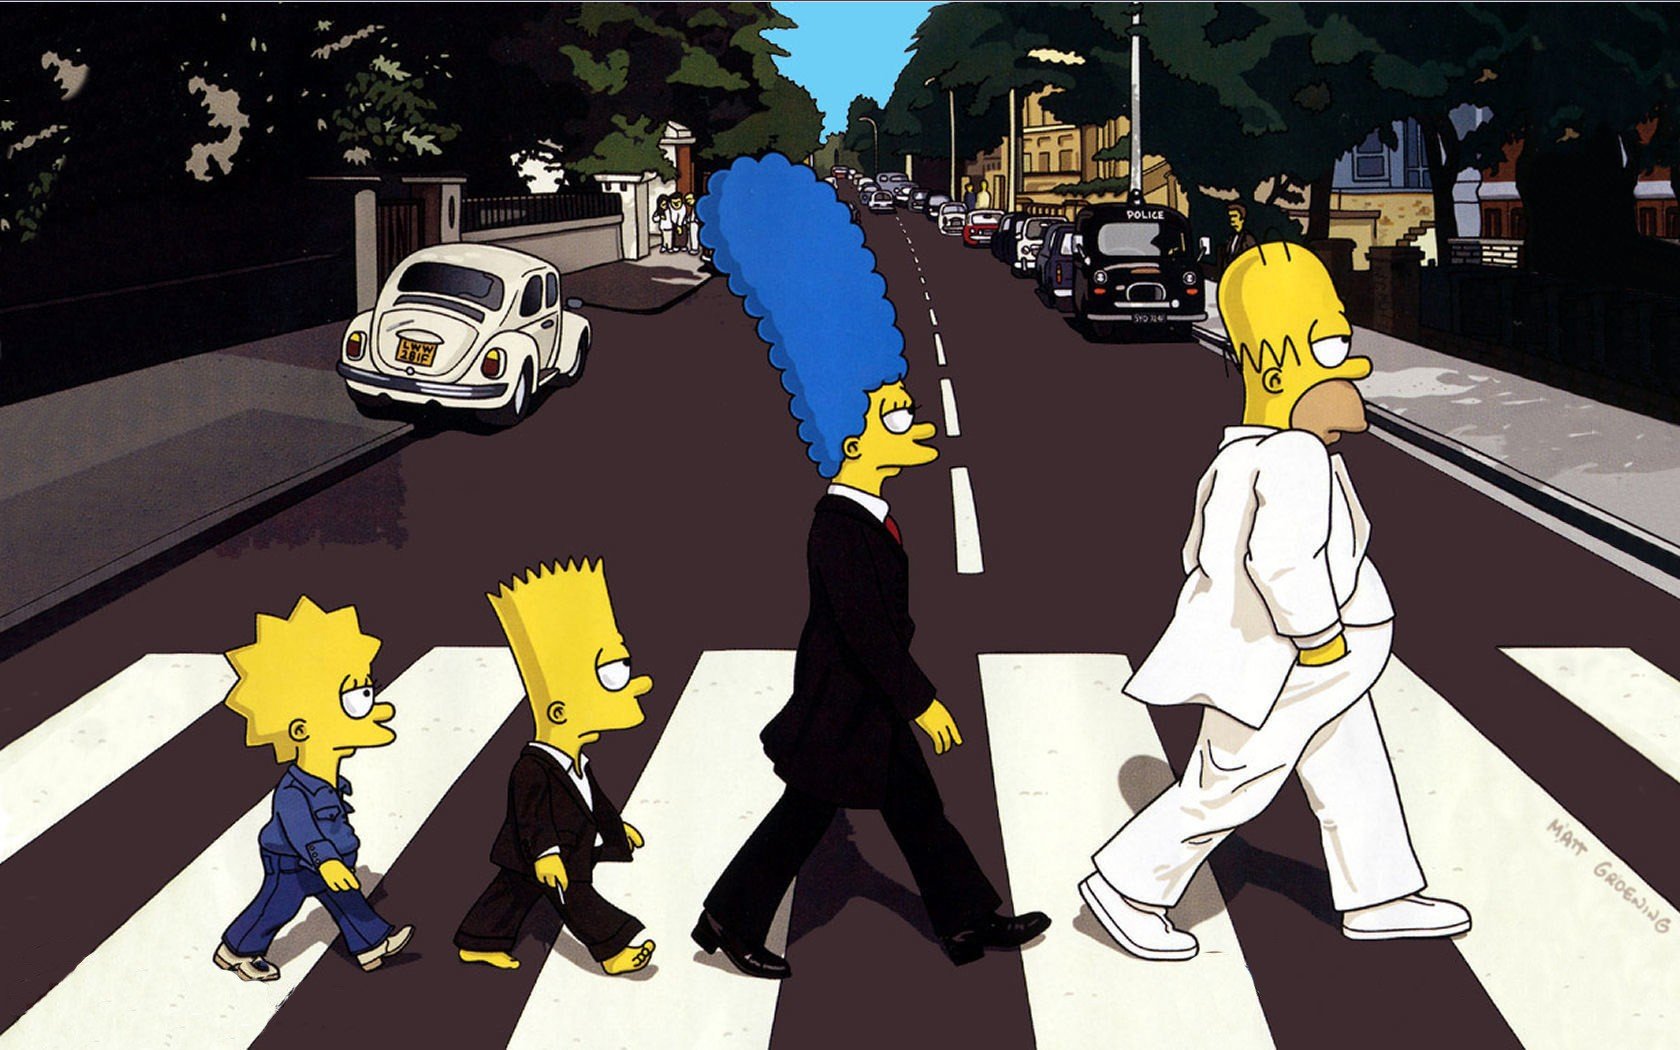 The Simpsons Wallpaper